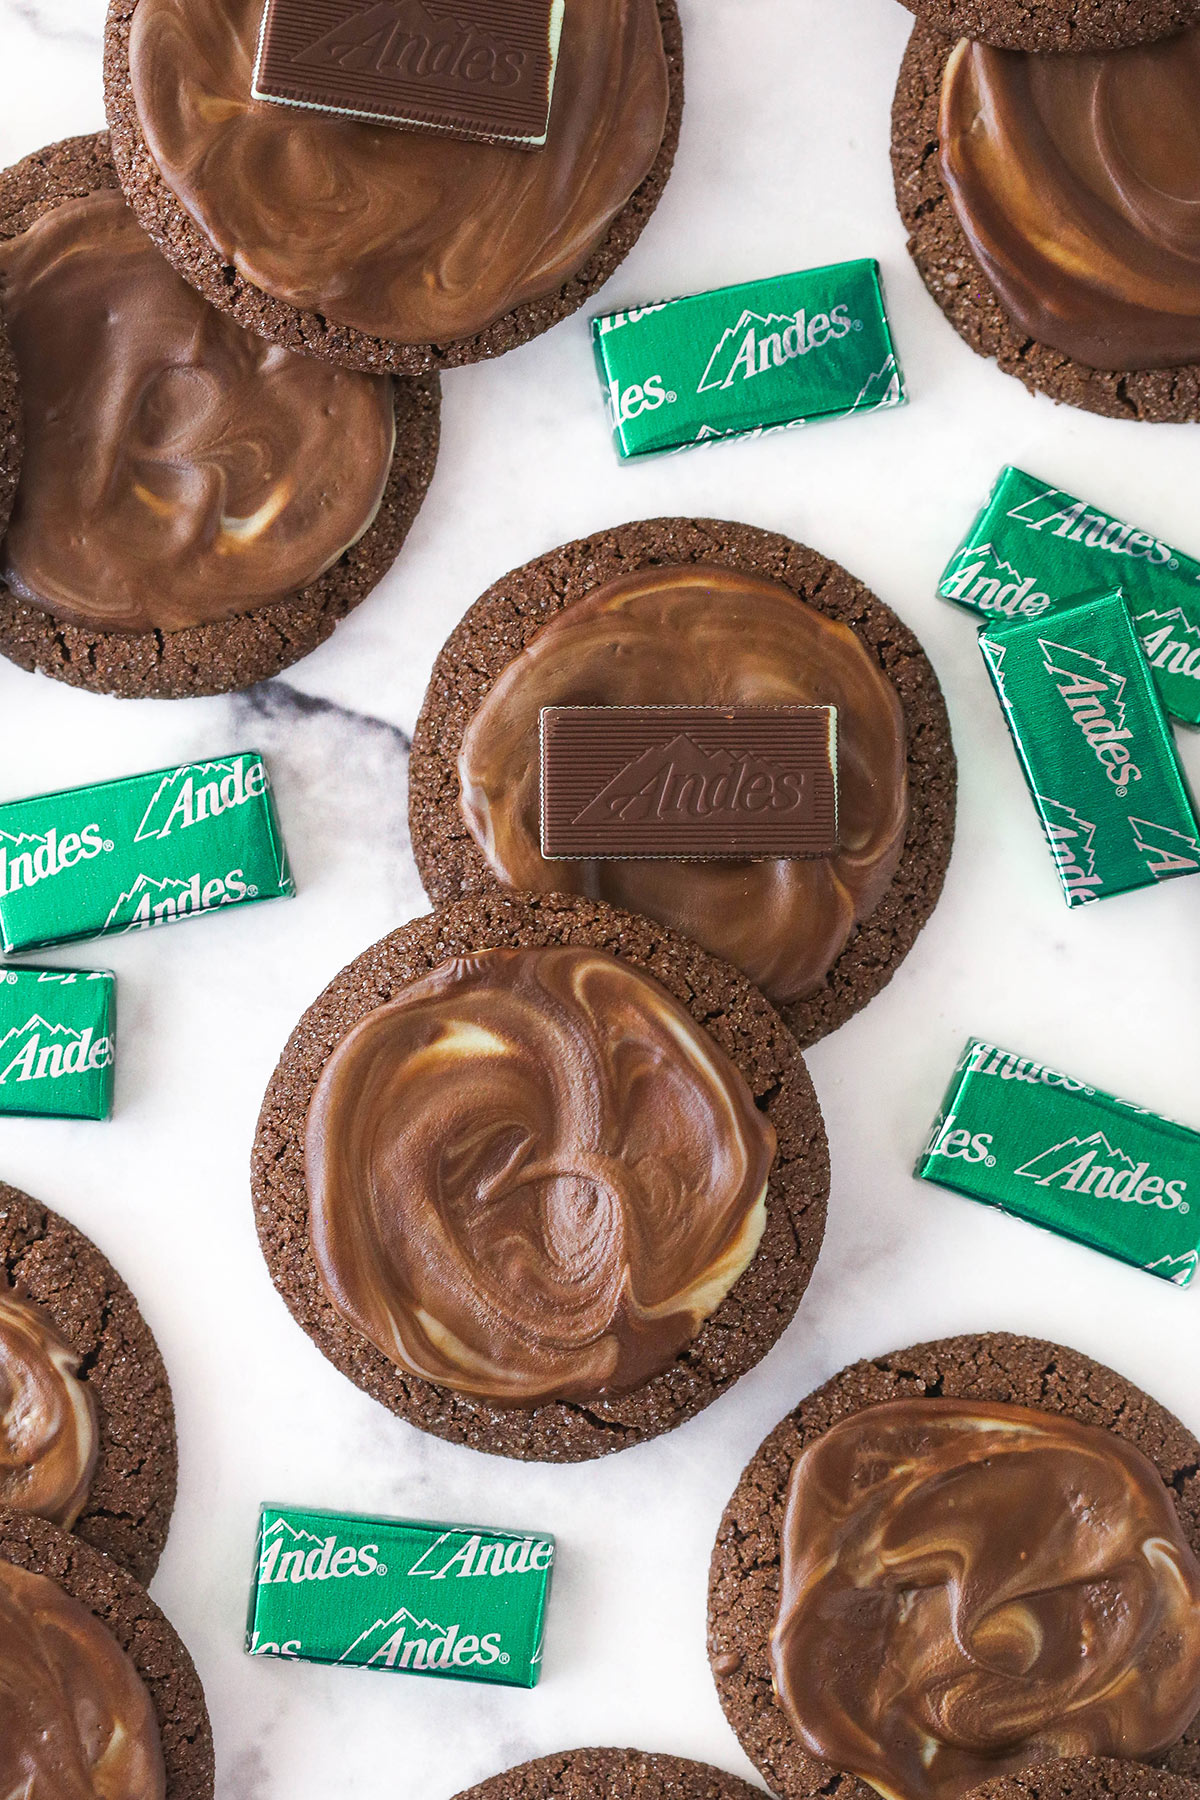 Overhead image of Andes mint cookies surrounded by Andes mints.